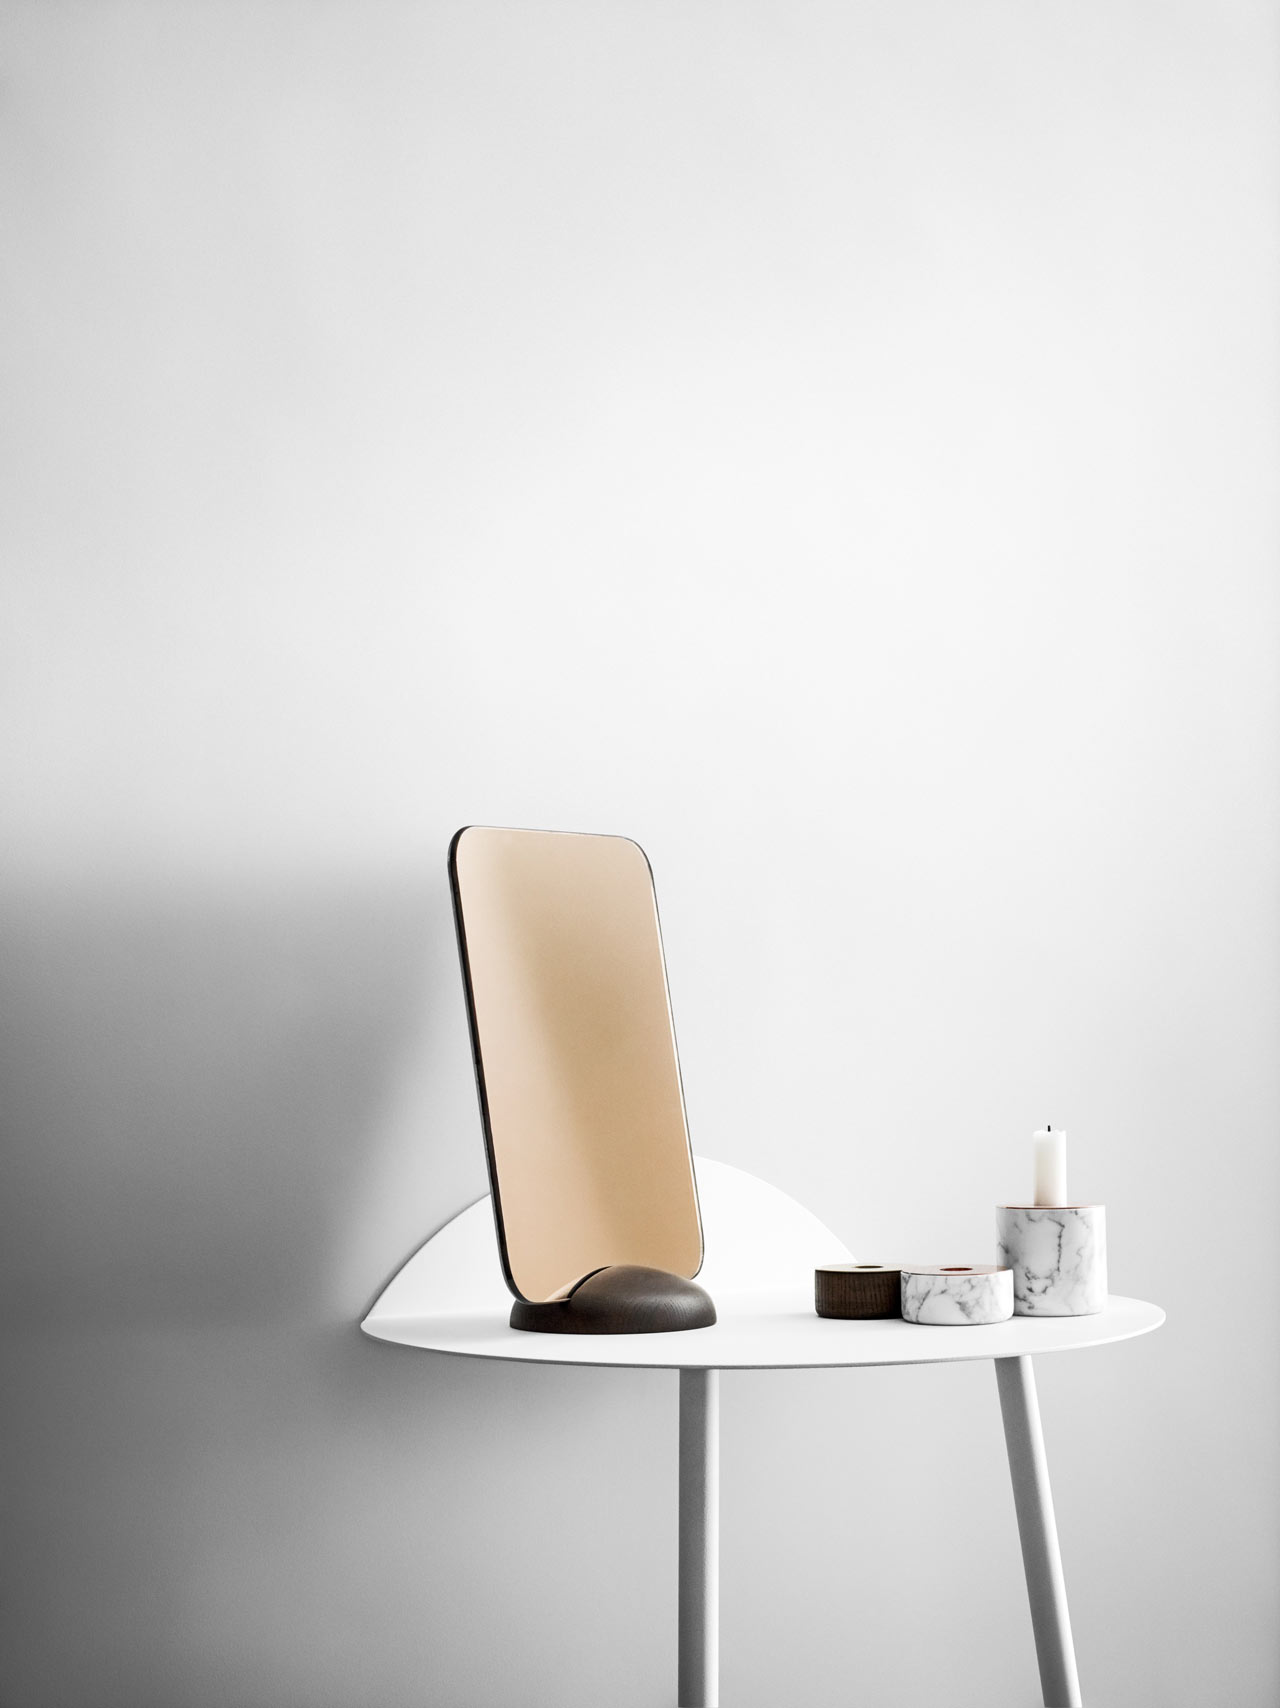 The Yeh Wall Table by Menu